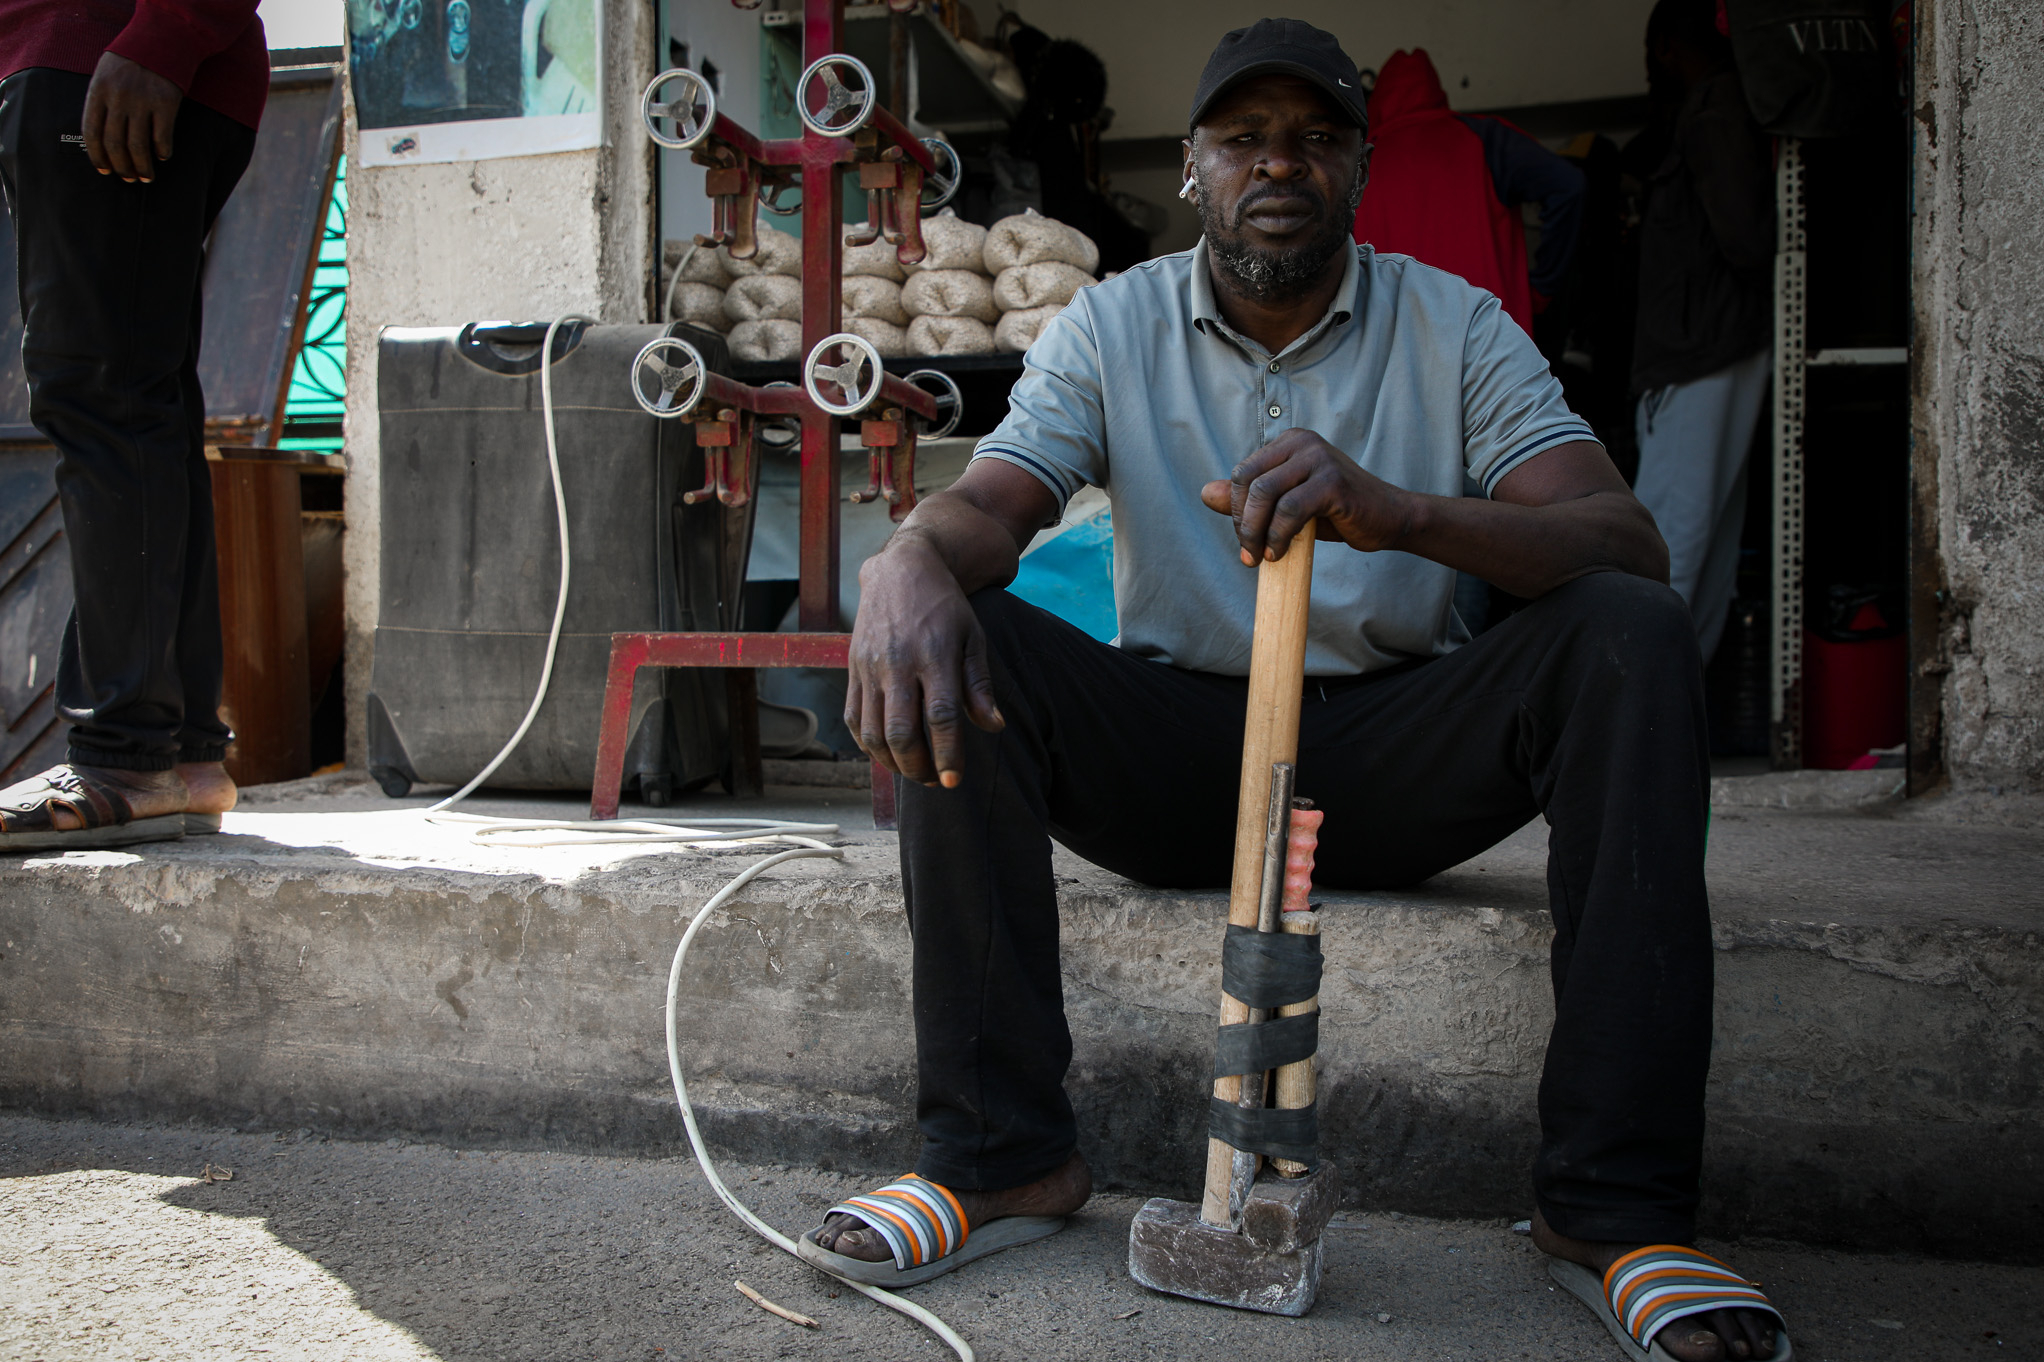 A labour migrant sits on a threshold in Tripoli/Libya with a hammer in his hand and looks into the camera.